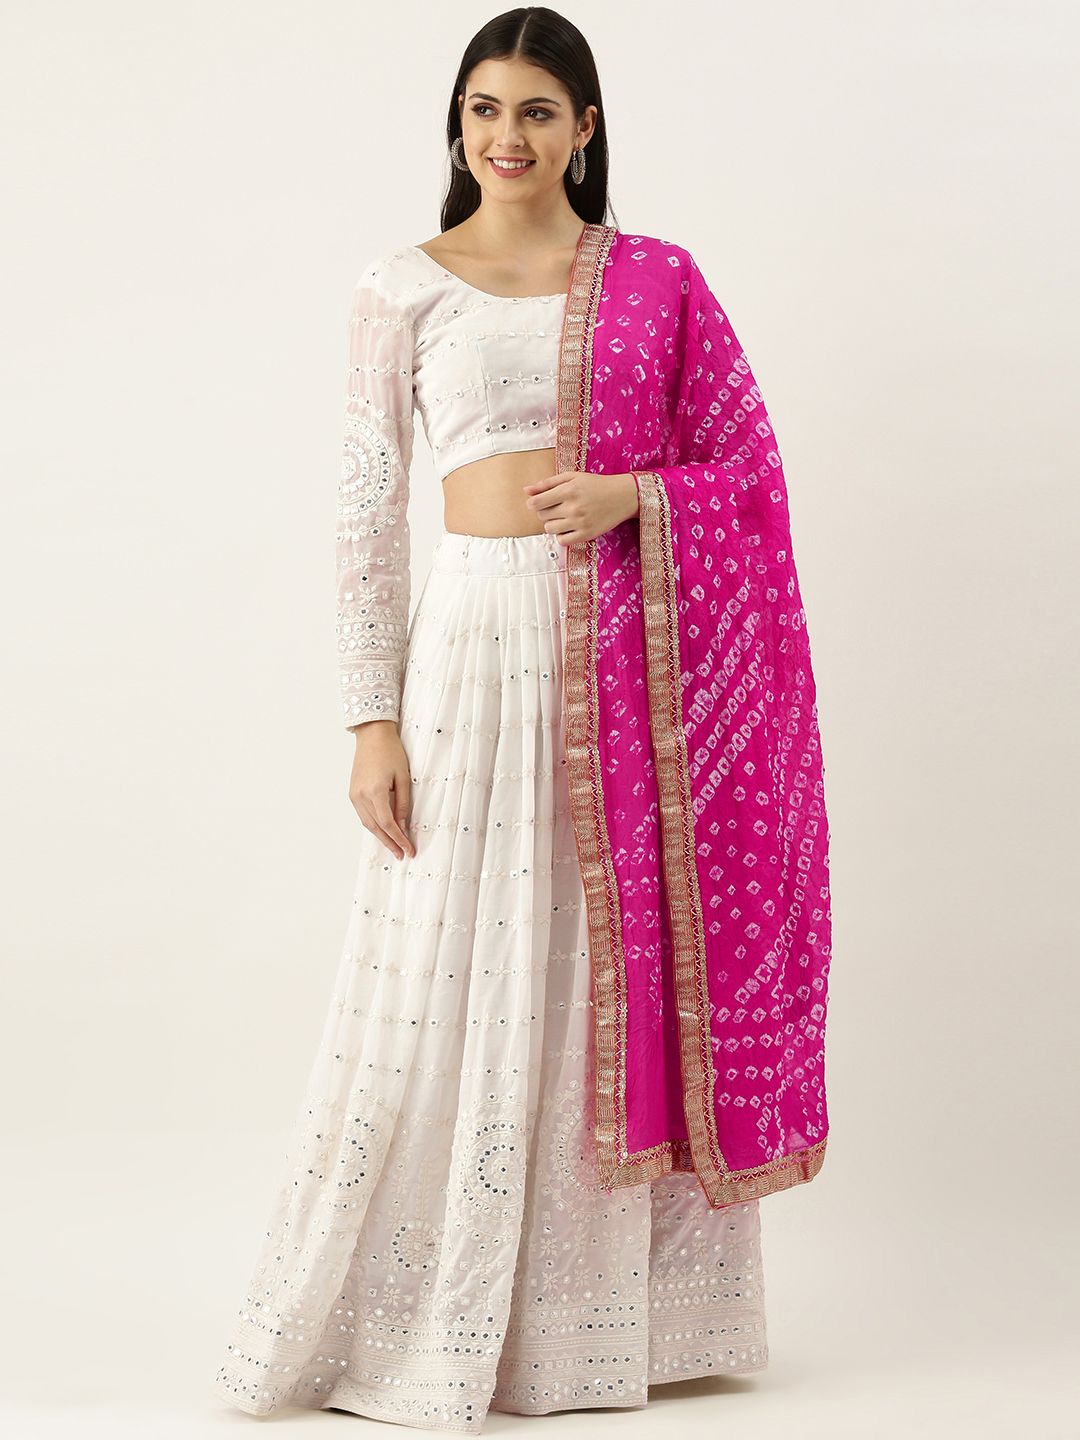 LOOKNBOOK ART White Embroidered Semi-Stitched Lehenga & Unstitched Blouse With Dupatta Price in India